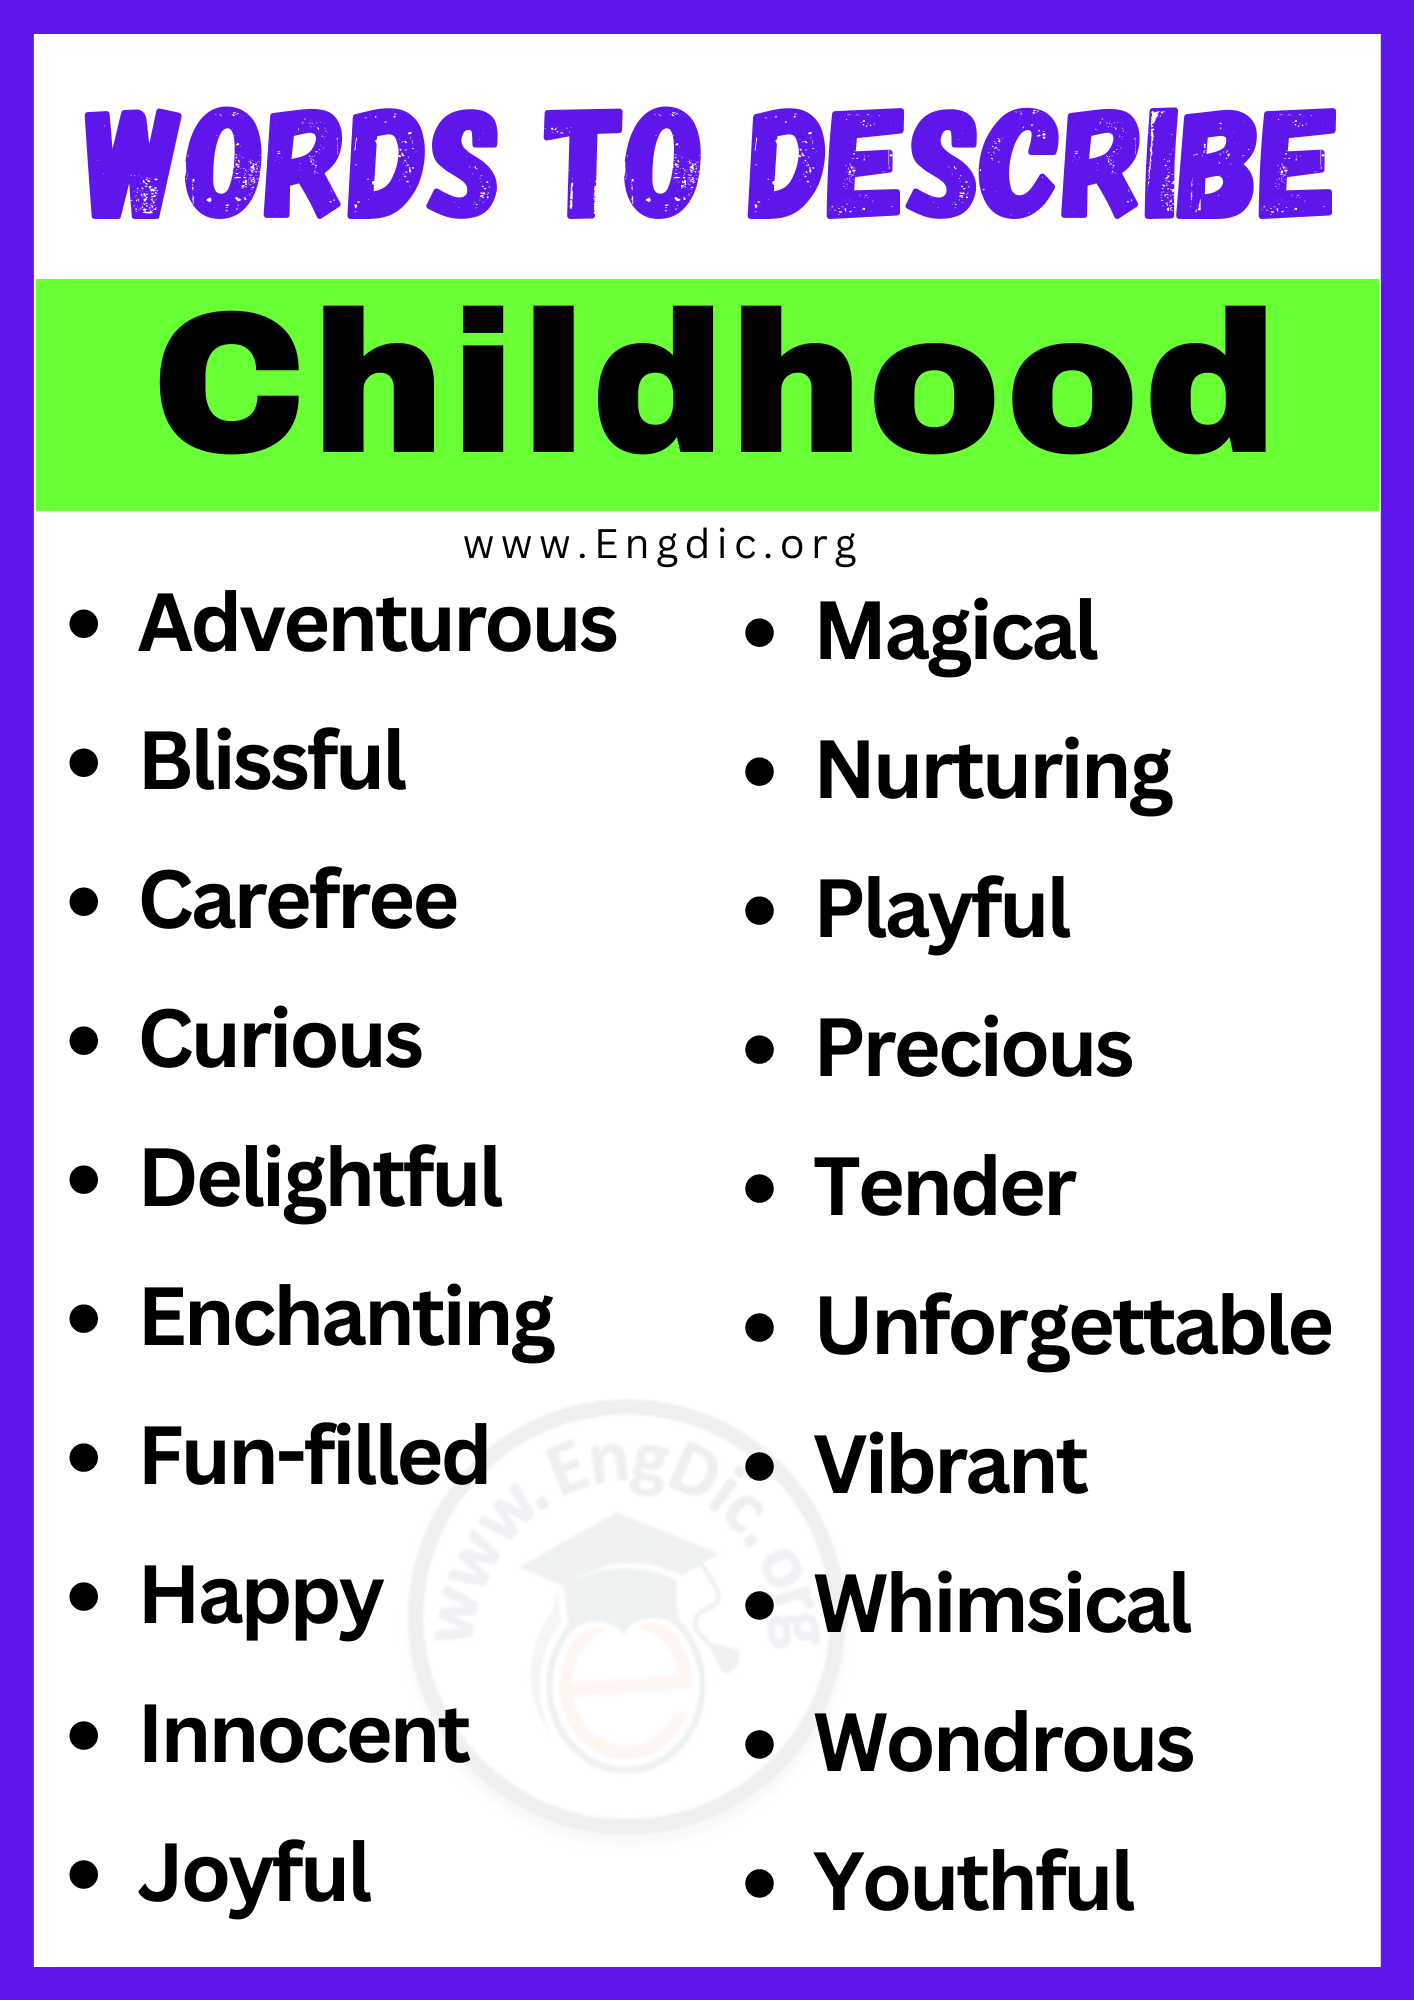 Words to Describe Childhood